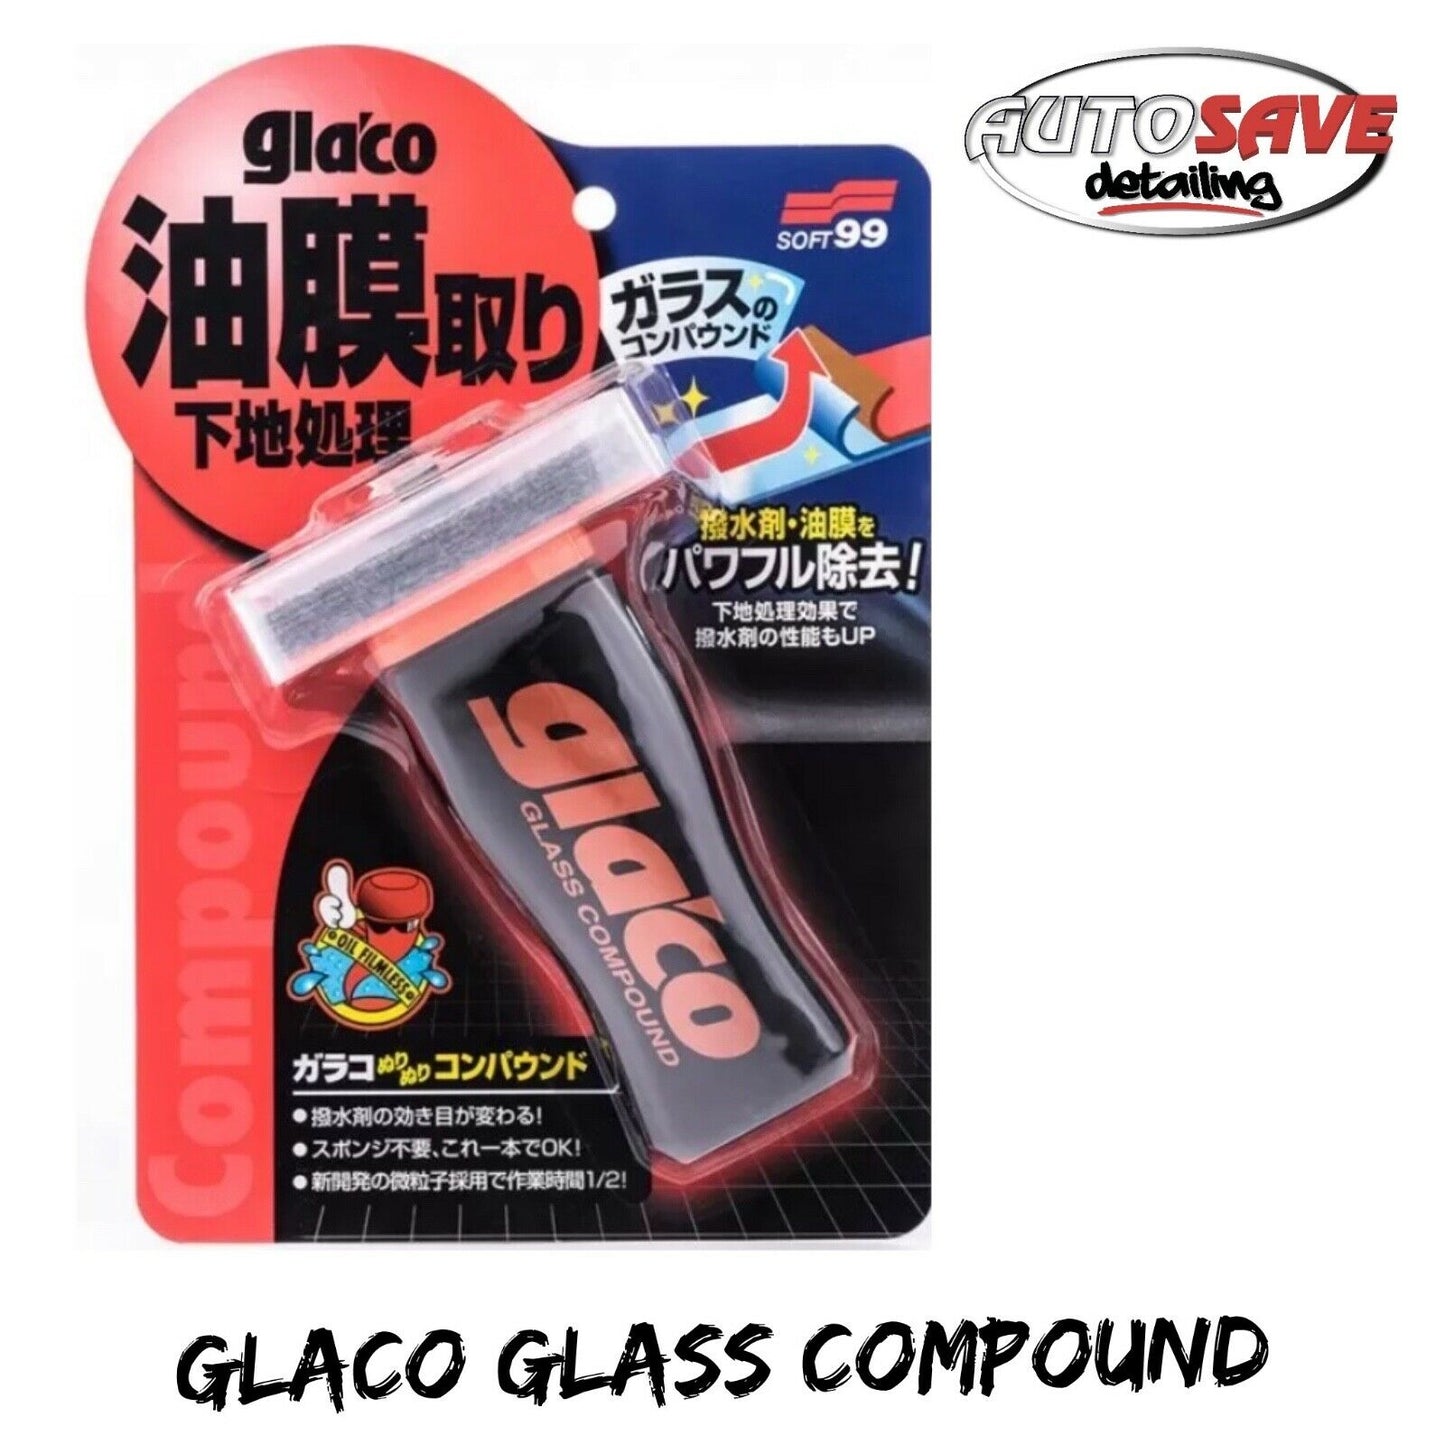 Soft99 Glaco Glass Compound Roll On  Glass Screen Cleaner Polish MADE IN JAPAN